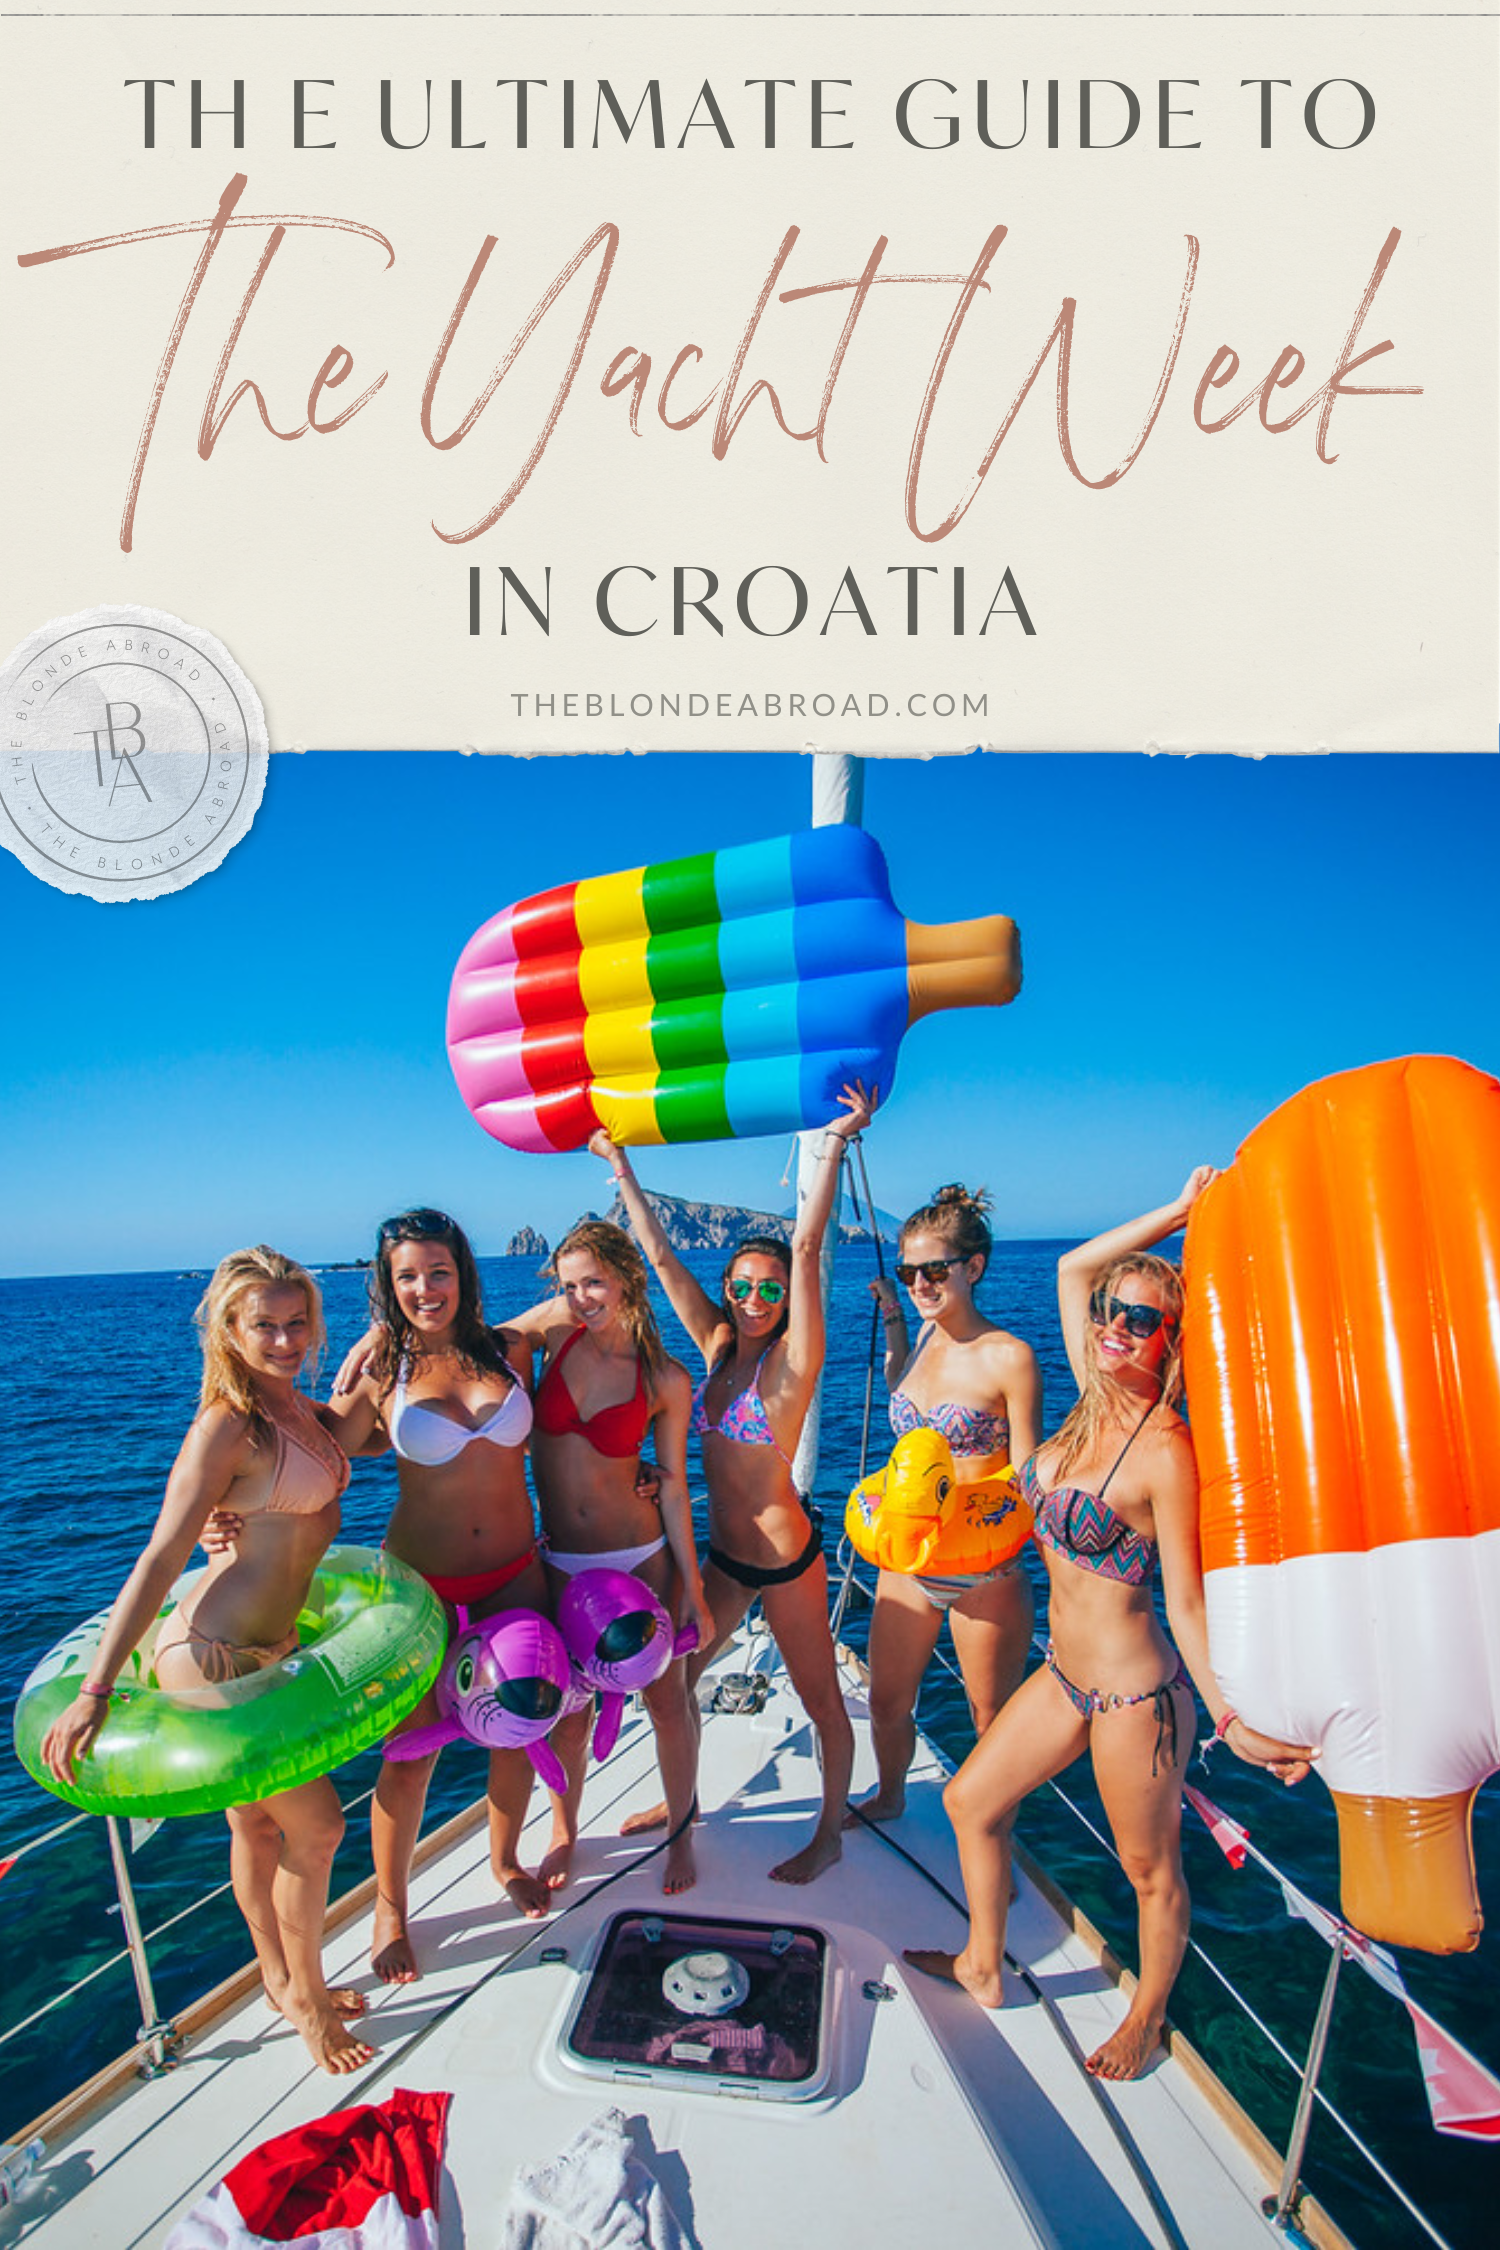 The Ultimate Guide to The Yacht Week Croatia